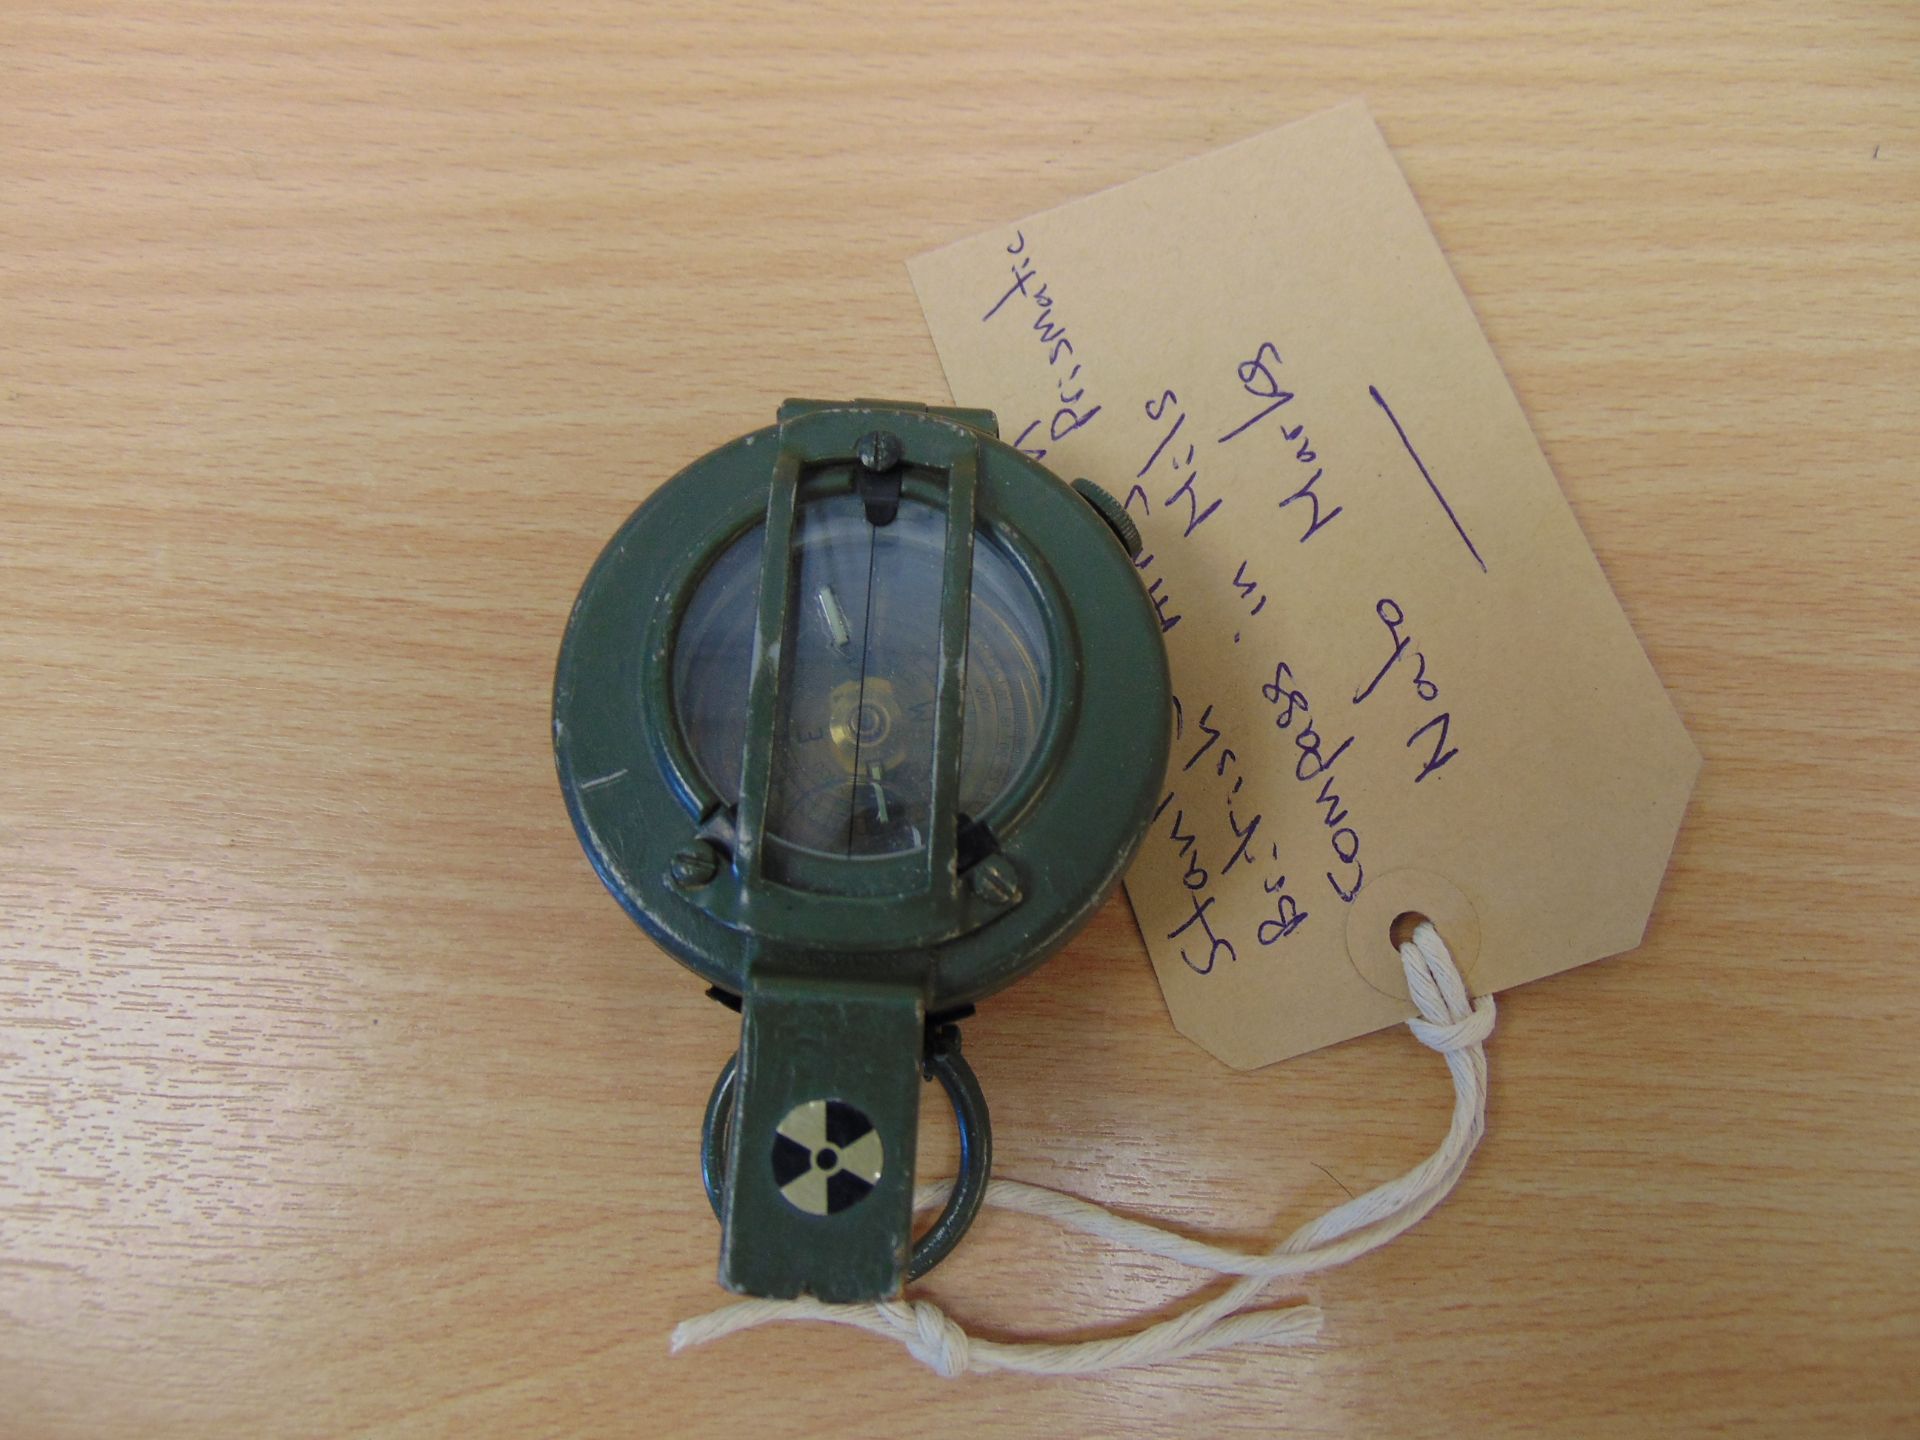 Stanley London British Army Prismatic Compass in mils, Nato marks - Image 4 of 4